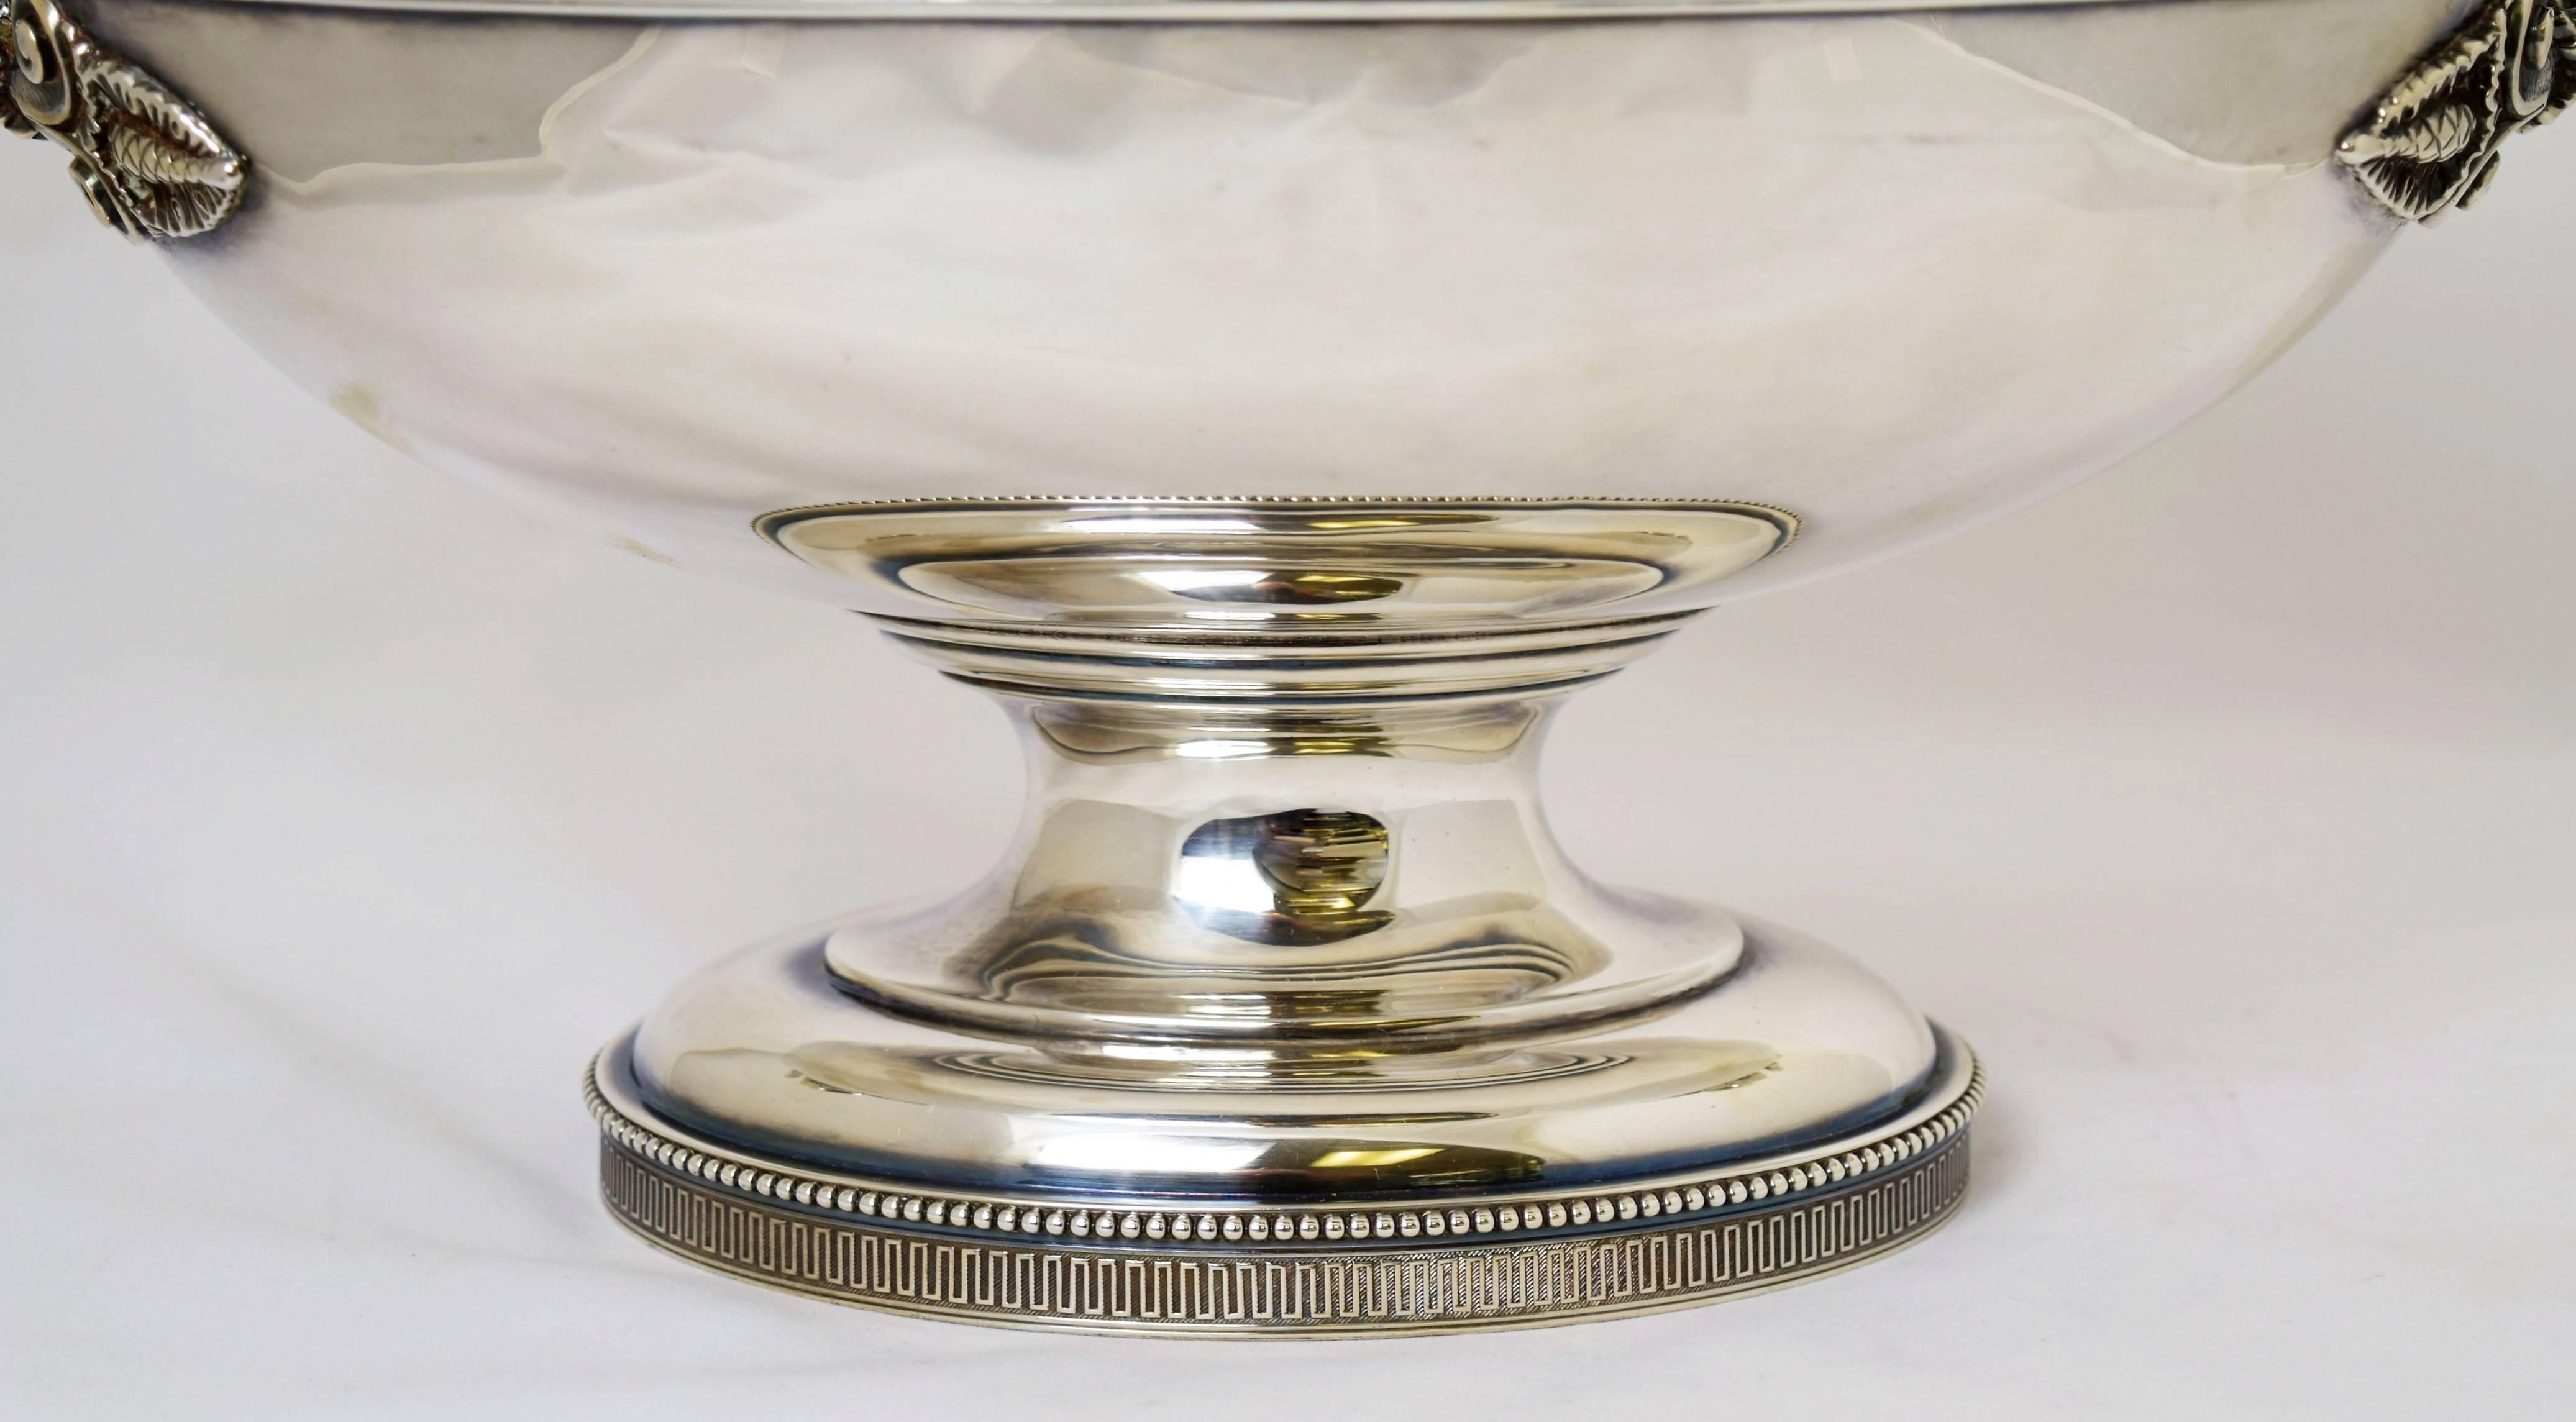 American Tiffany & Co. Large Sterling Silver Tureen, circa 1875